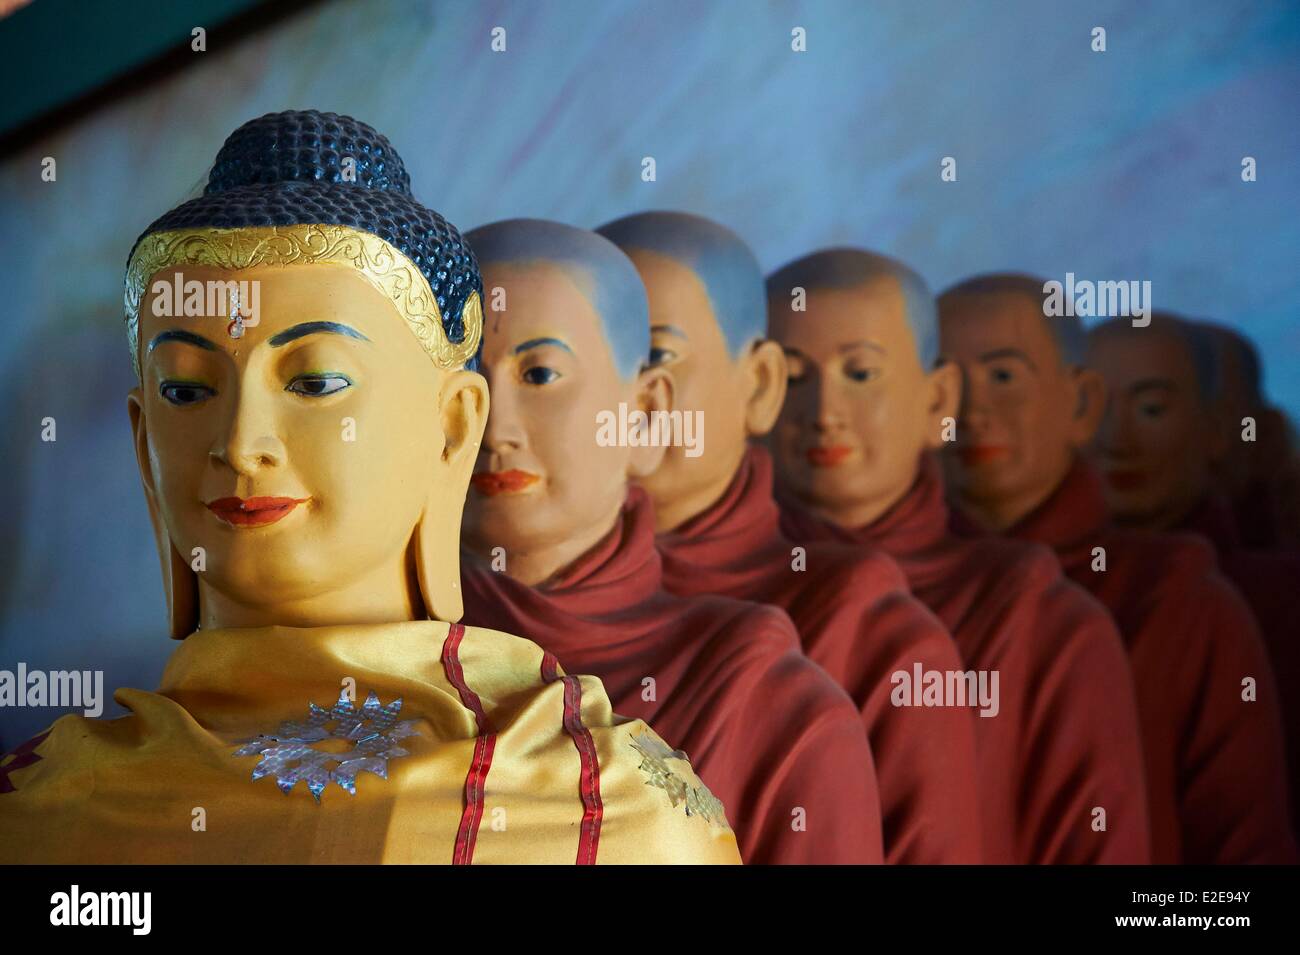 Myanmar (Burma), Yangon division, Yangon, statues of Buddhist monks procession receive offerings Stock Photo